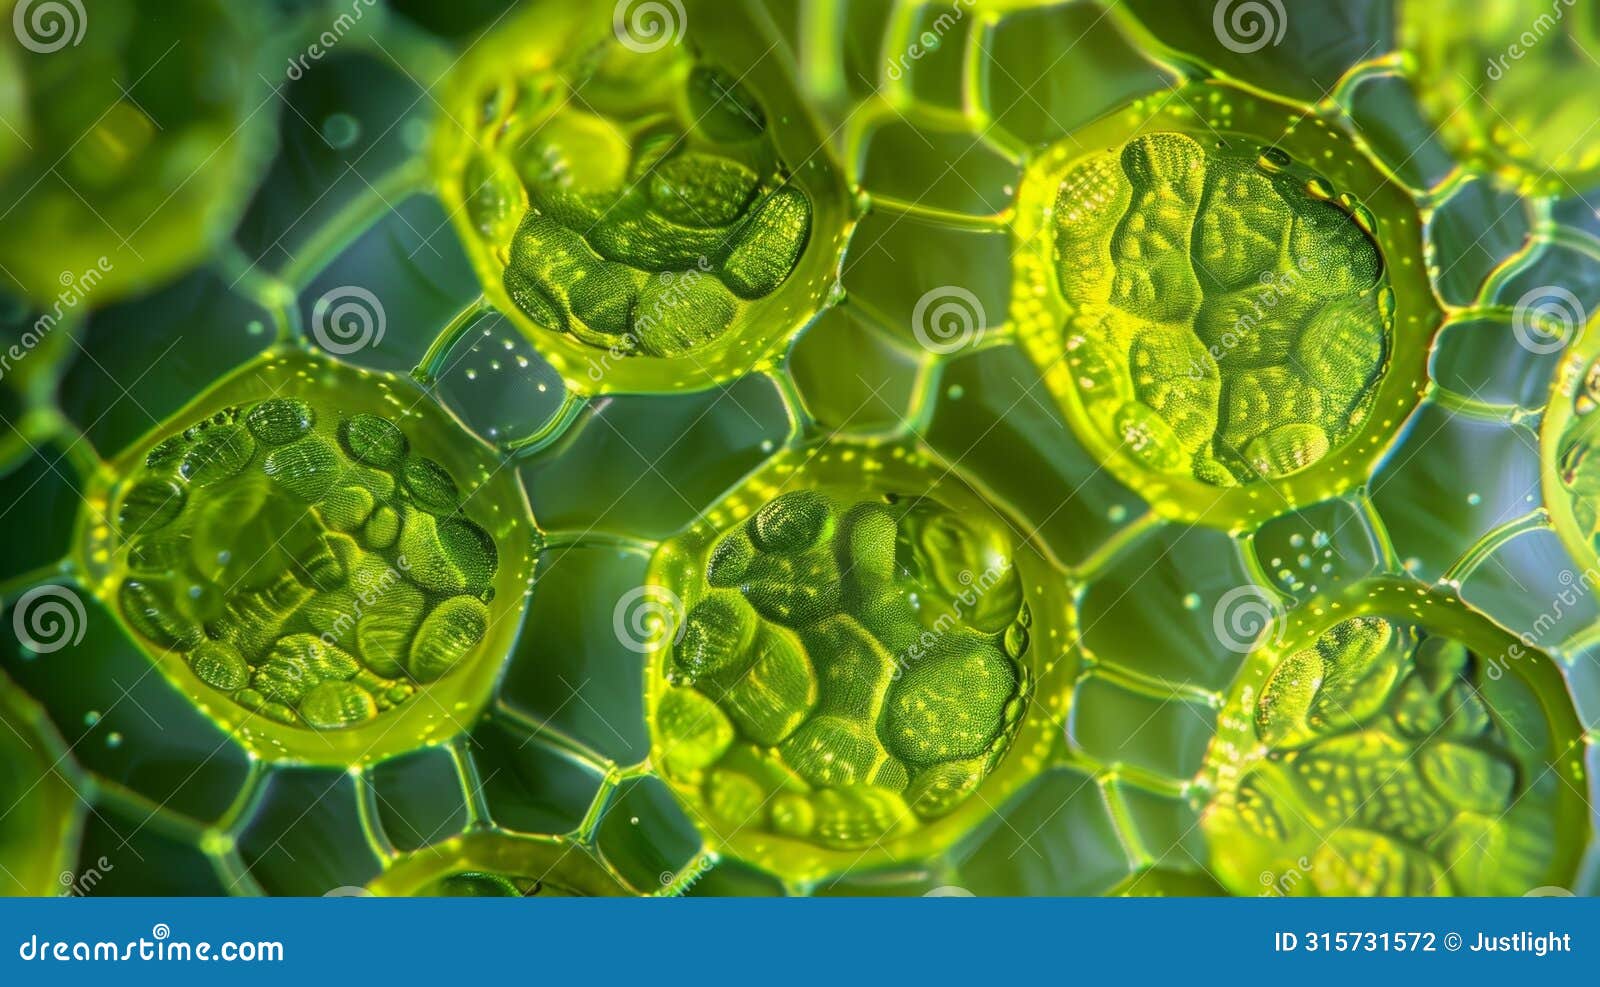 a magnified view of the chloroplasts within an algal cell responsible for photosynthesis and giving the cells their